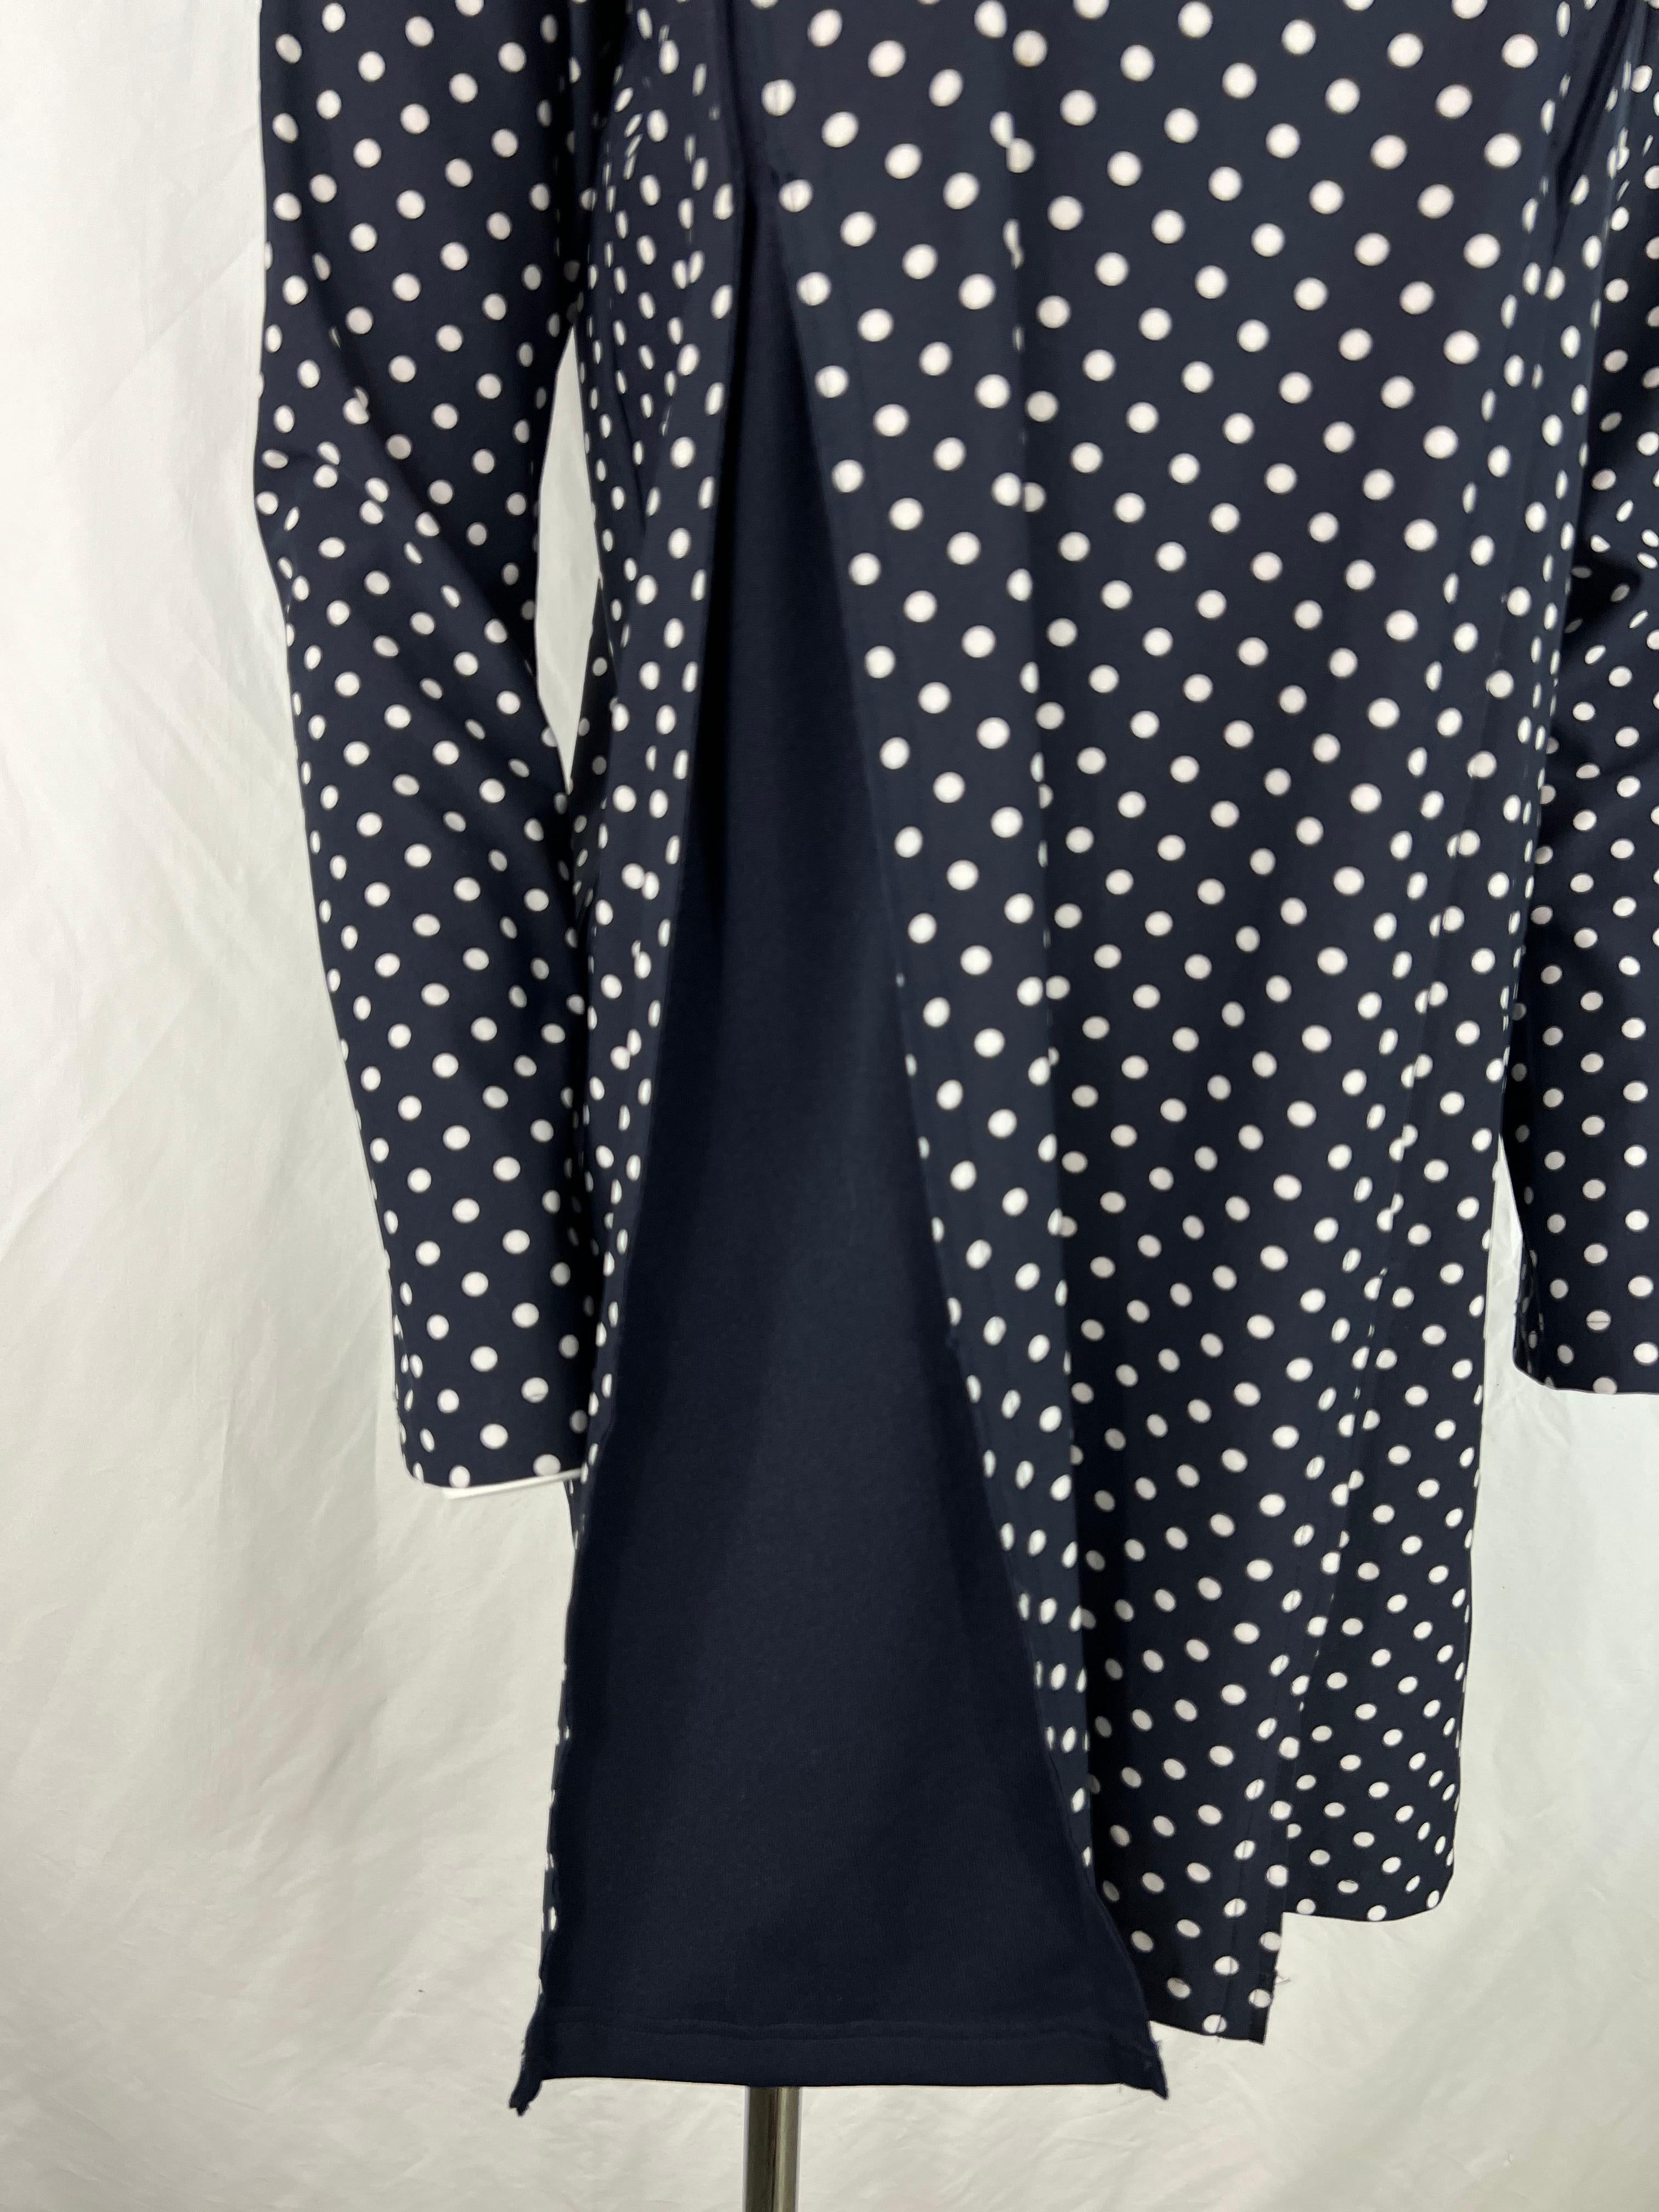 Product details:

The dress features blue and white polka dot pattern, long sleeves, crew neck line and flare skirt detail design.